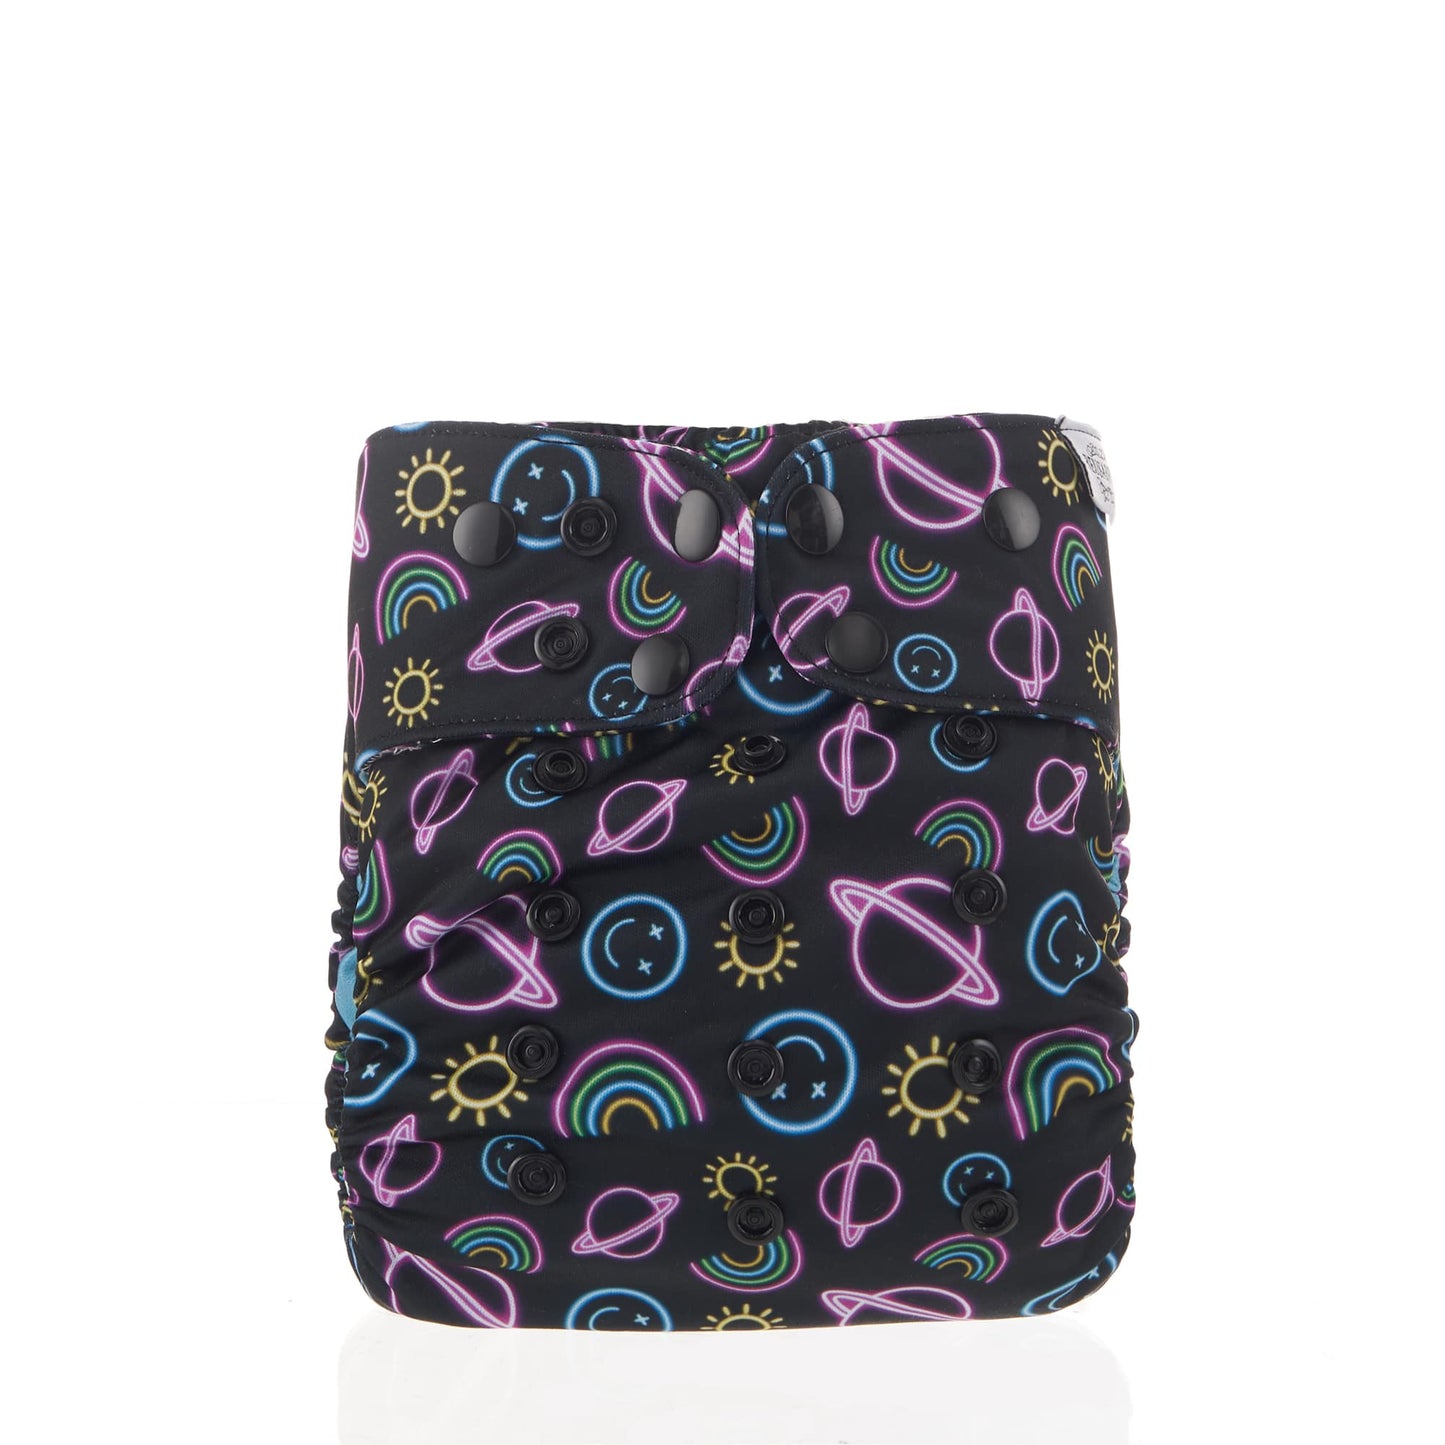 Reusable cloth nappy with a neon space print.